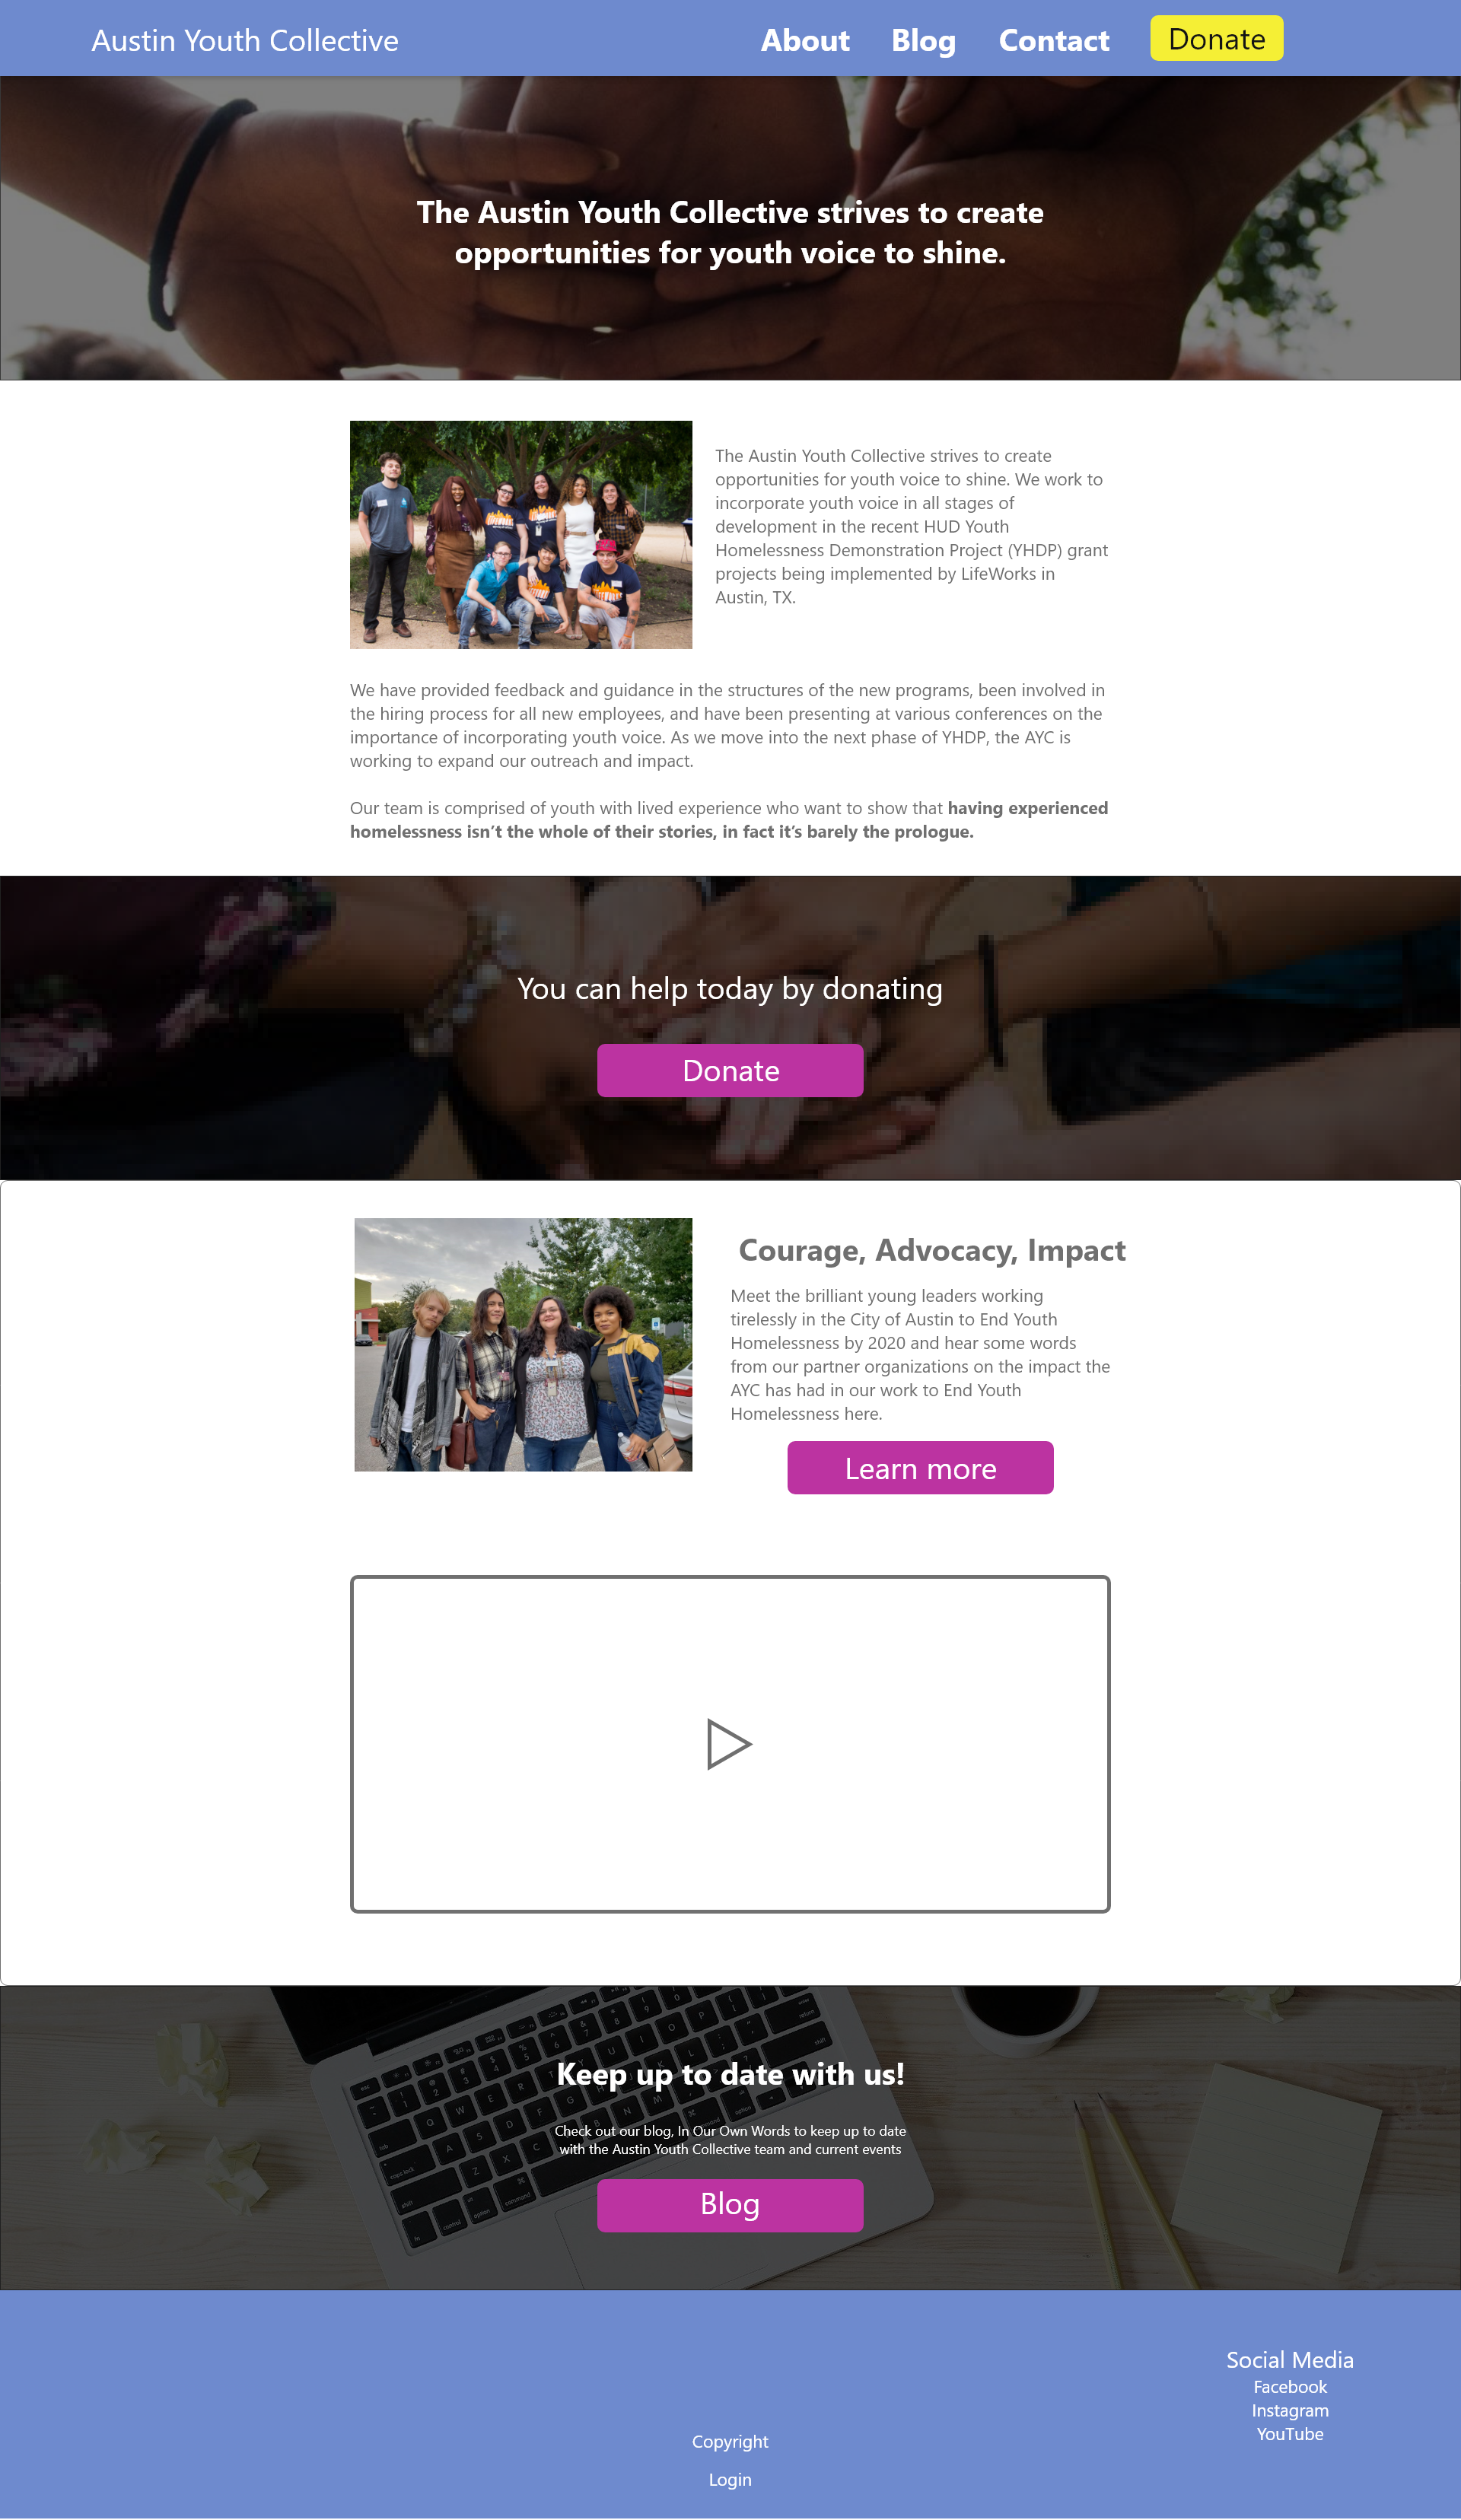 Image of a the Home page of Austin Youth Collective